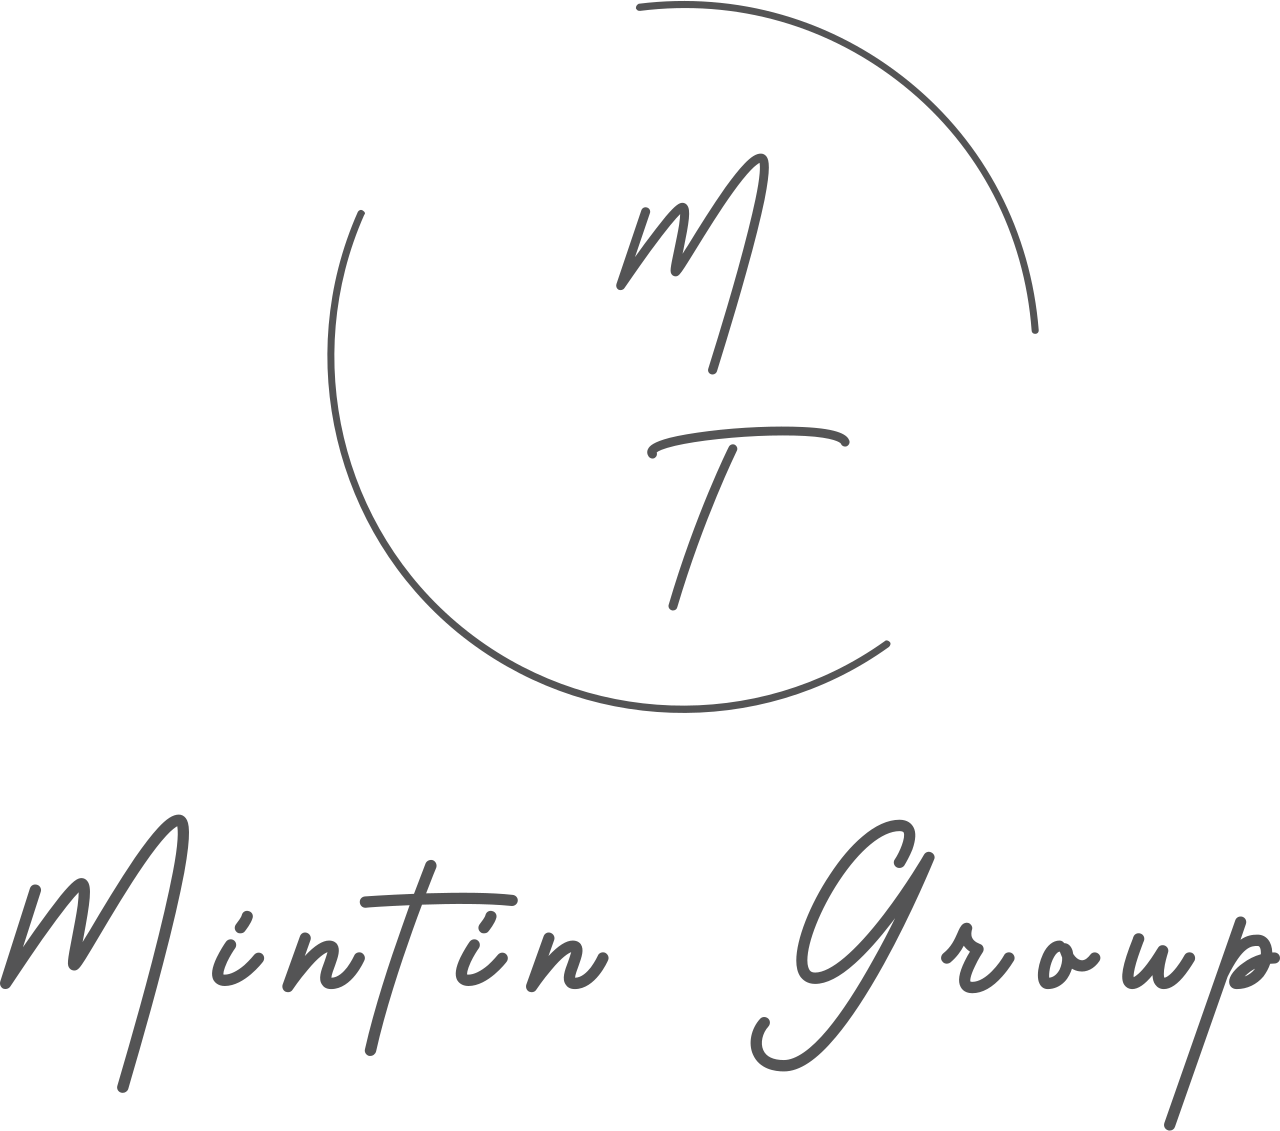 Mintin Group's web page